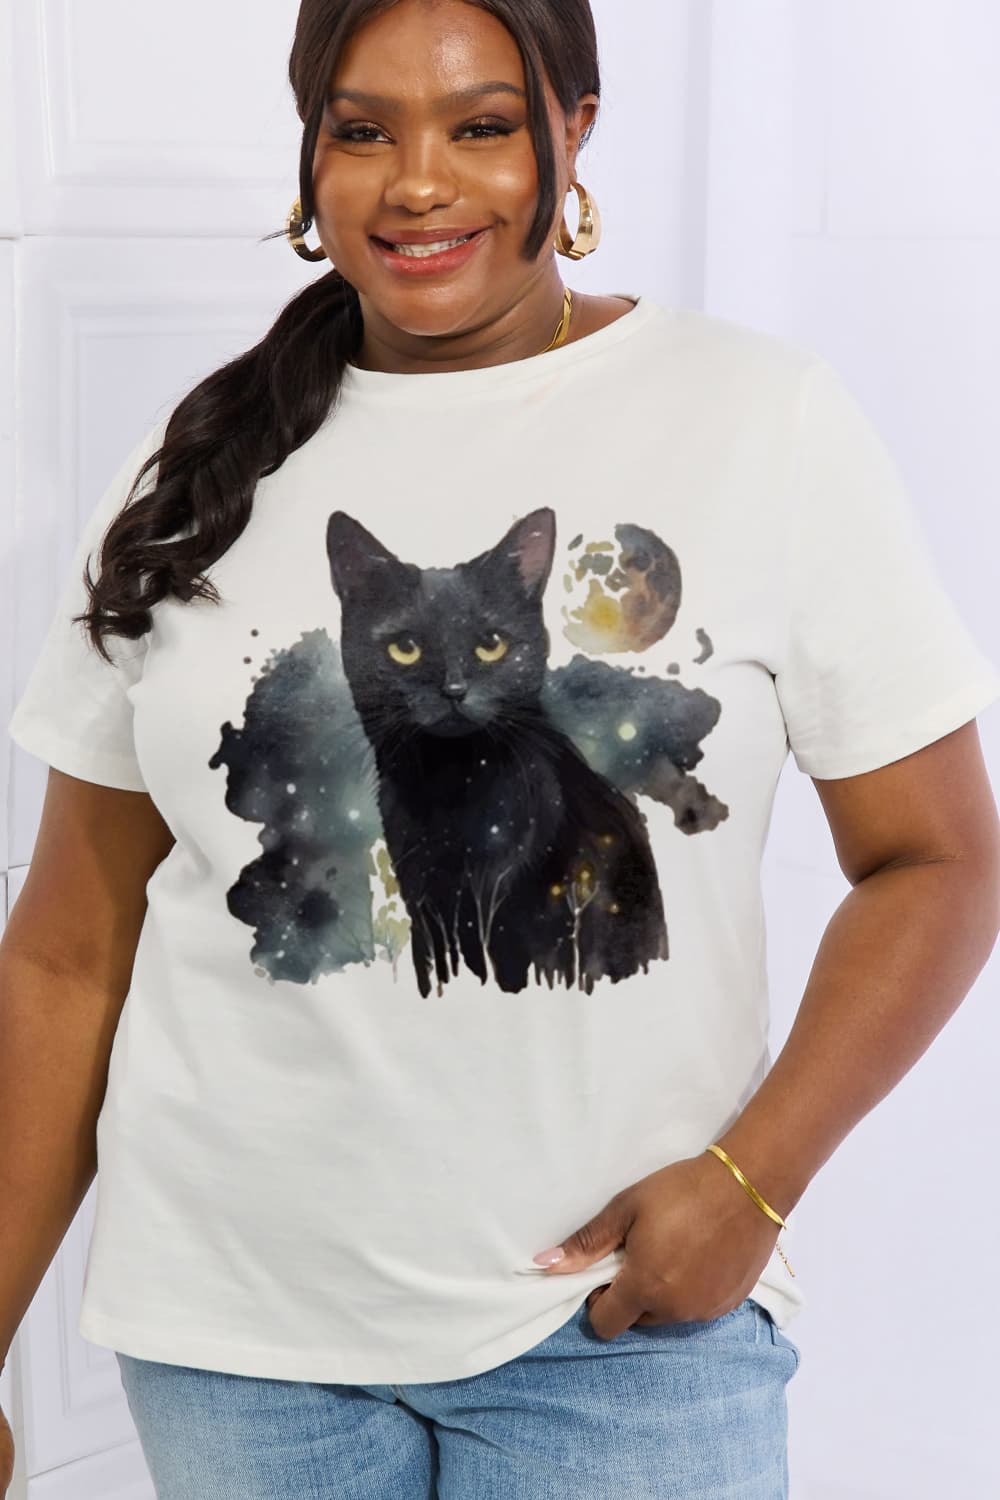 Simply Love Graphic T-shirts Full Size Black Cat Graphic Cotton Tee